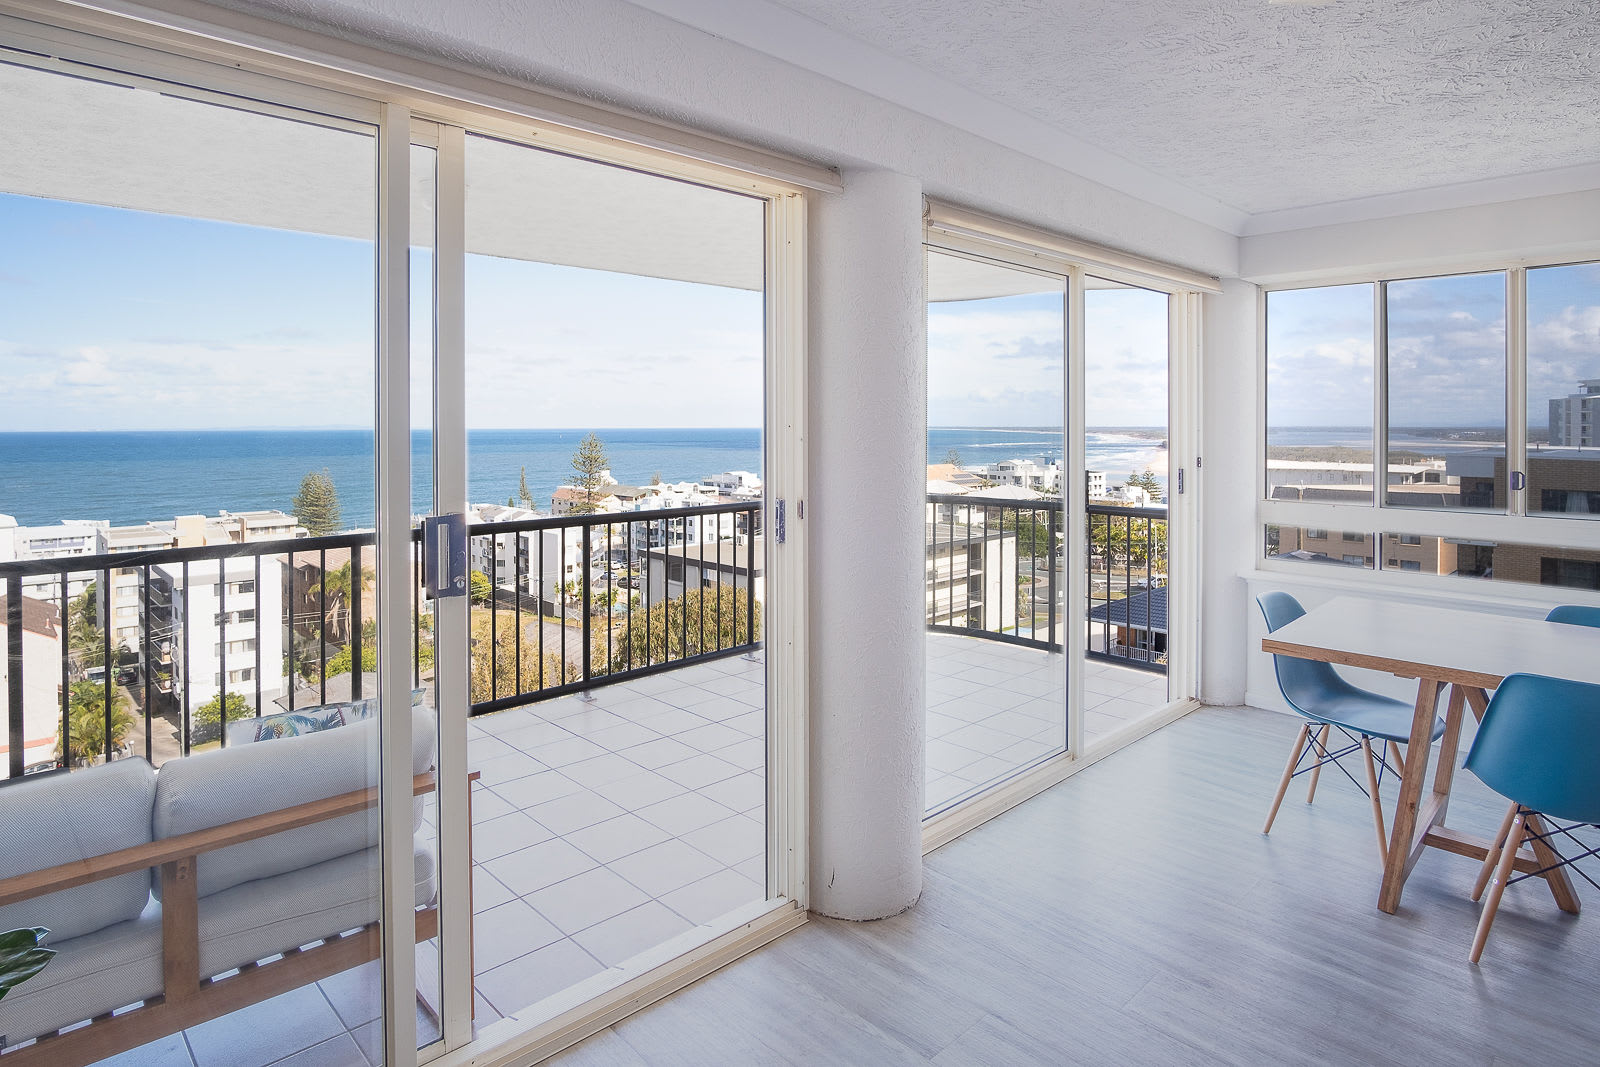 This spacious apartment captures stunning views of Kings Beach.